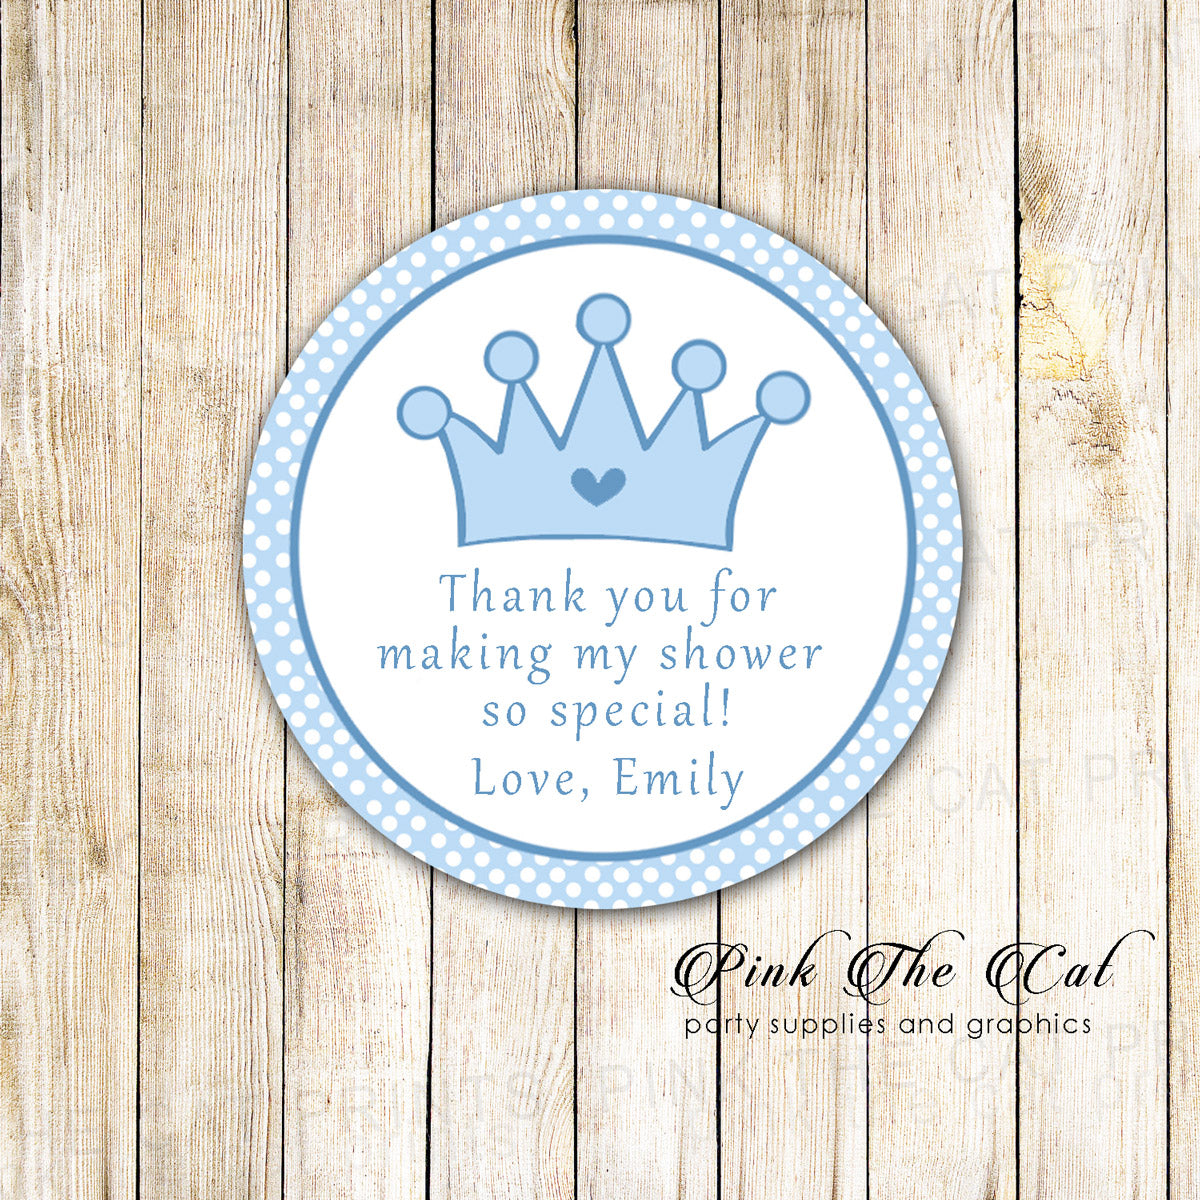  Prince Thank You Tag Favor Sticker Label Birthday Baby Shower